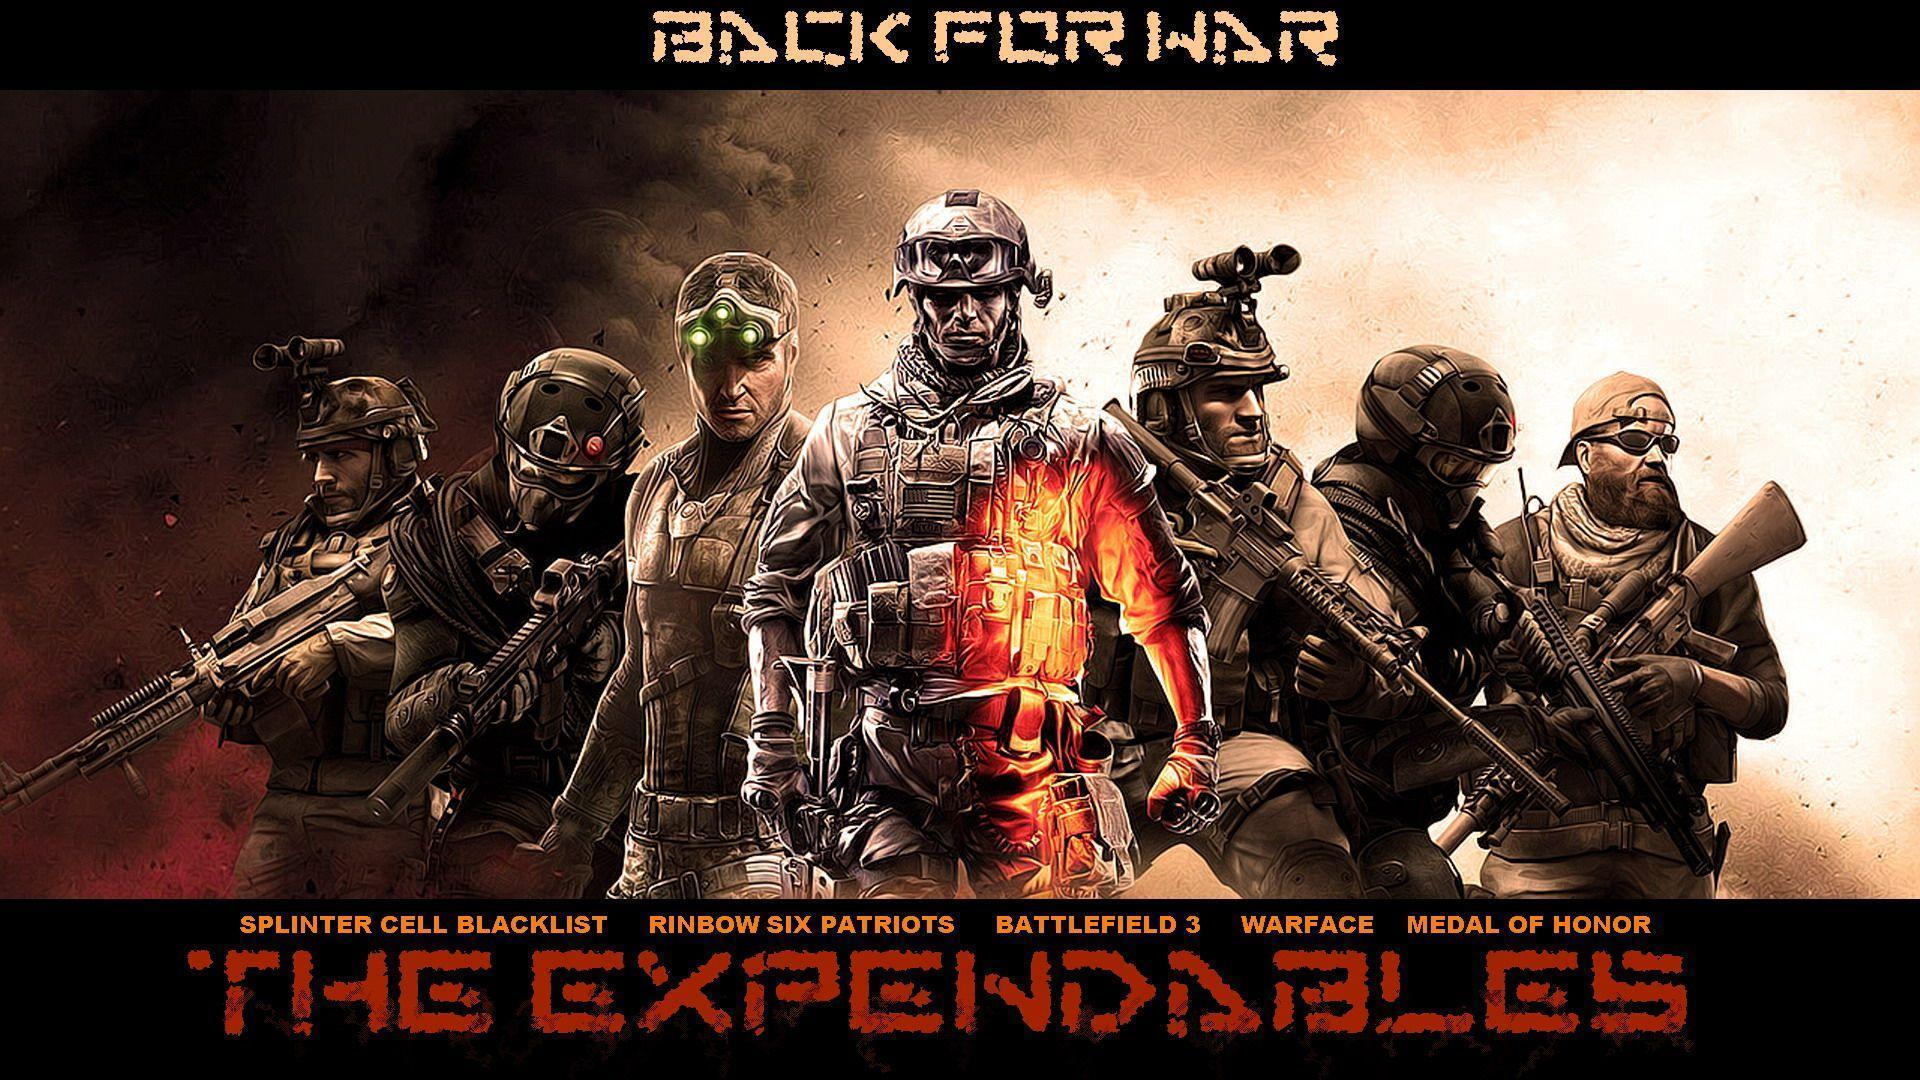 Wallpaper Tagged With EXPENDABLES. EXPENDABLES HD Wallpaper